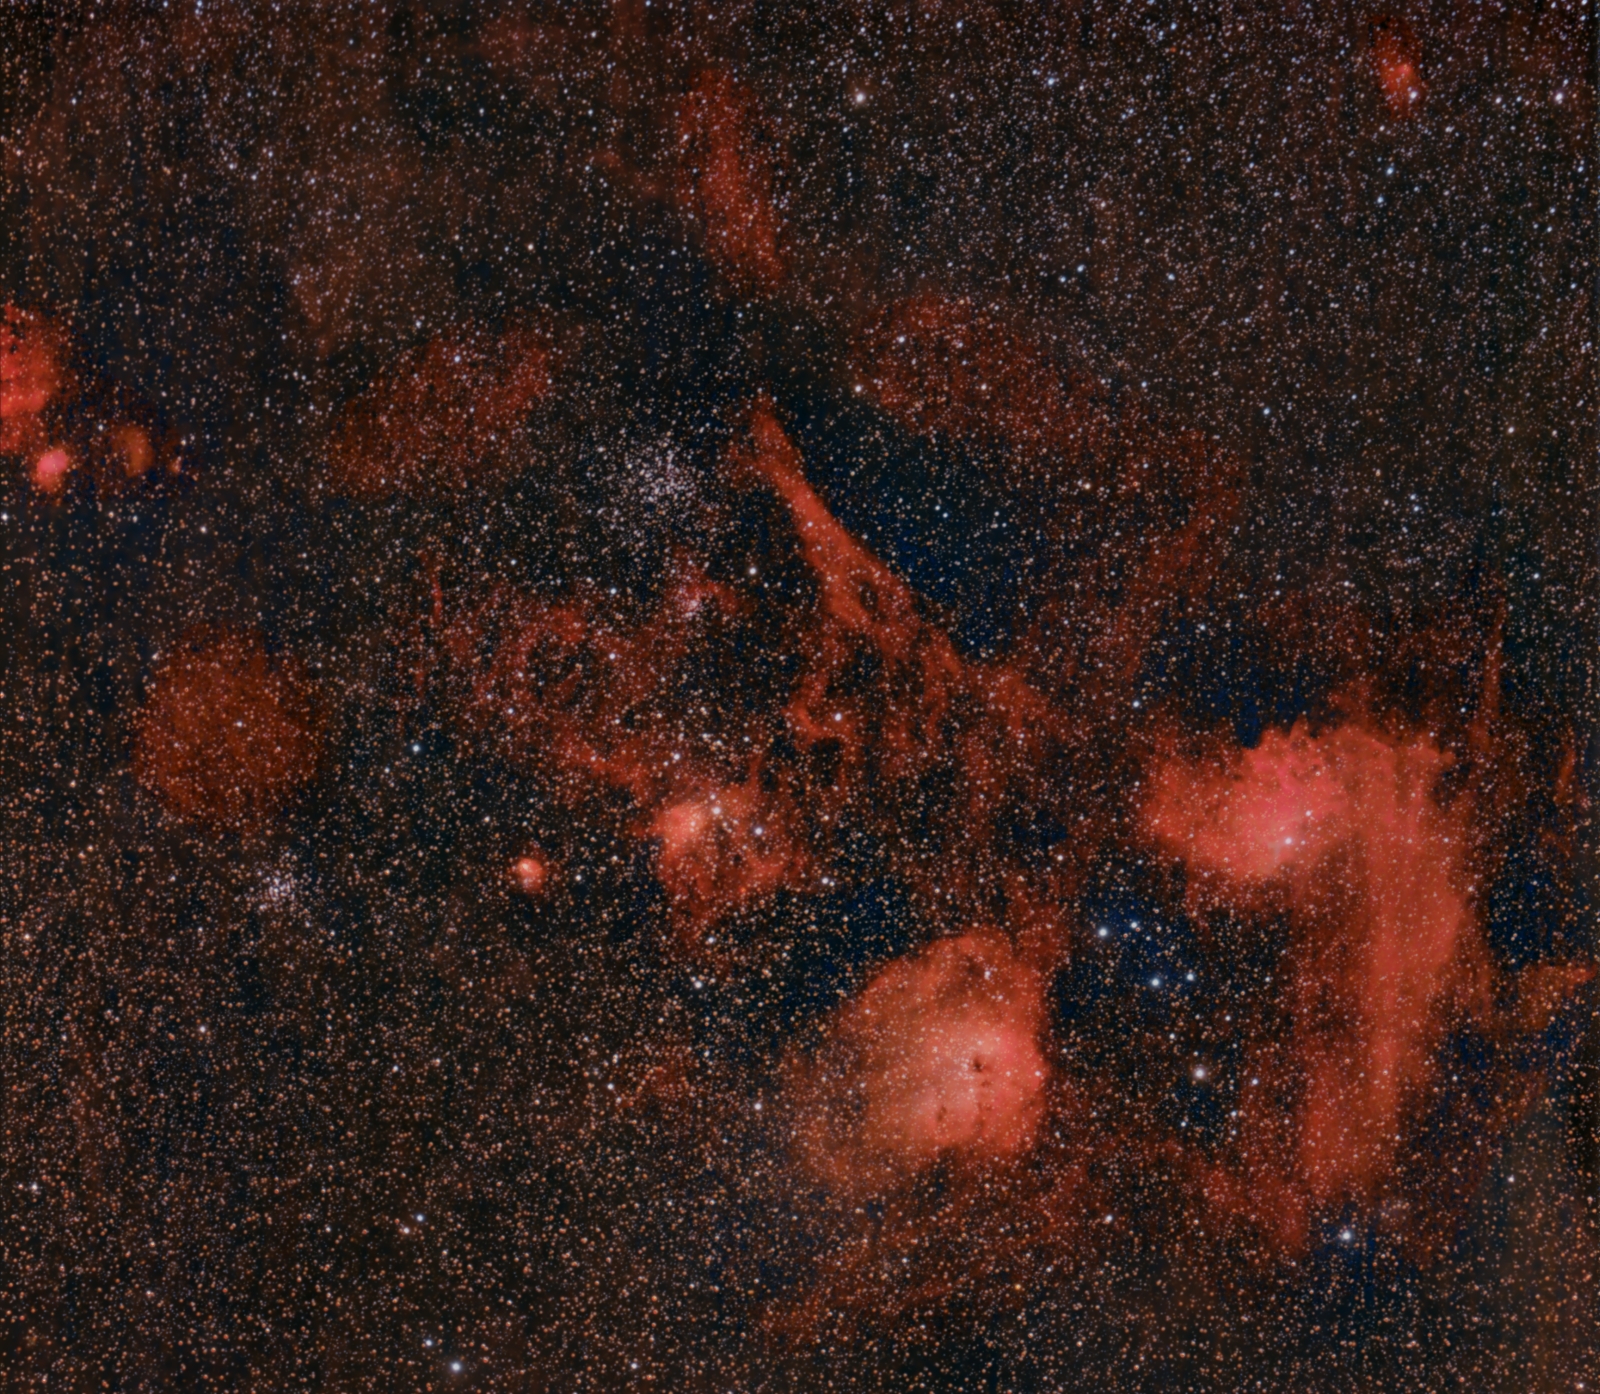 auriga widefield: Samyang 135mm; Canon 77da; 2h 6min; Idas V4-filter; from decembre 25th 2021; Ha-red more stretched and rather weak stars; IC 405, IC410, M38, M36, etc.;